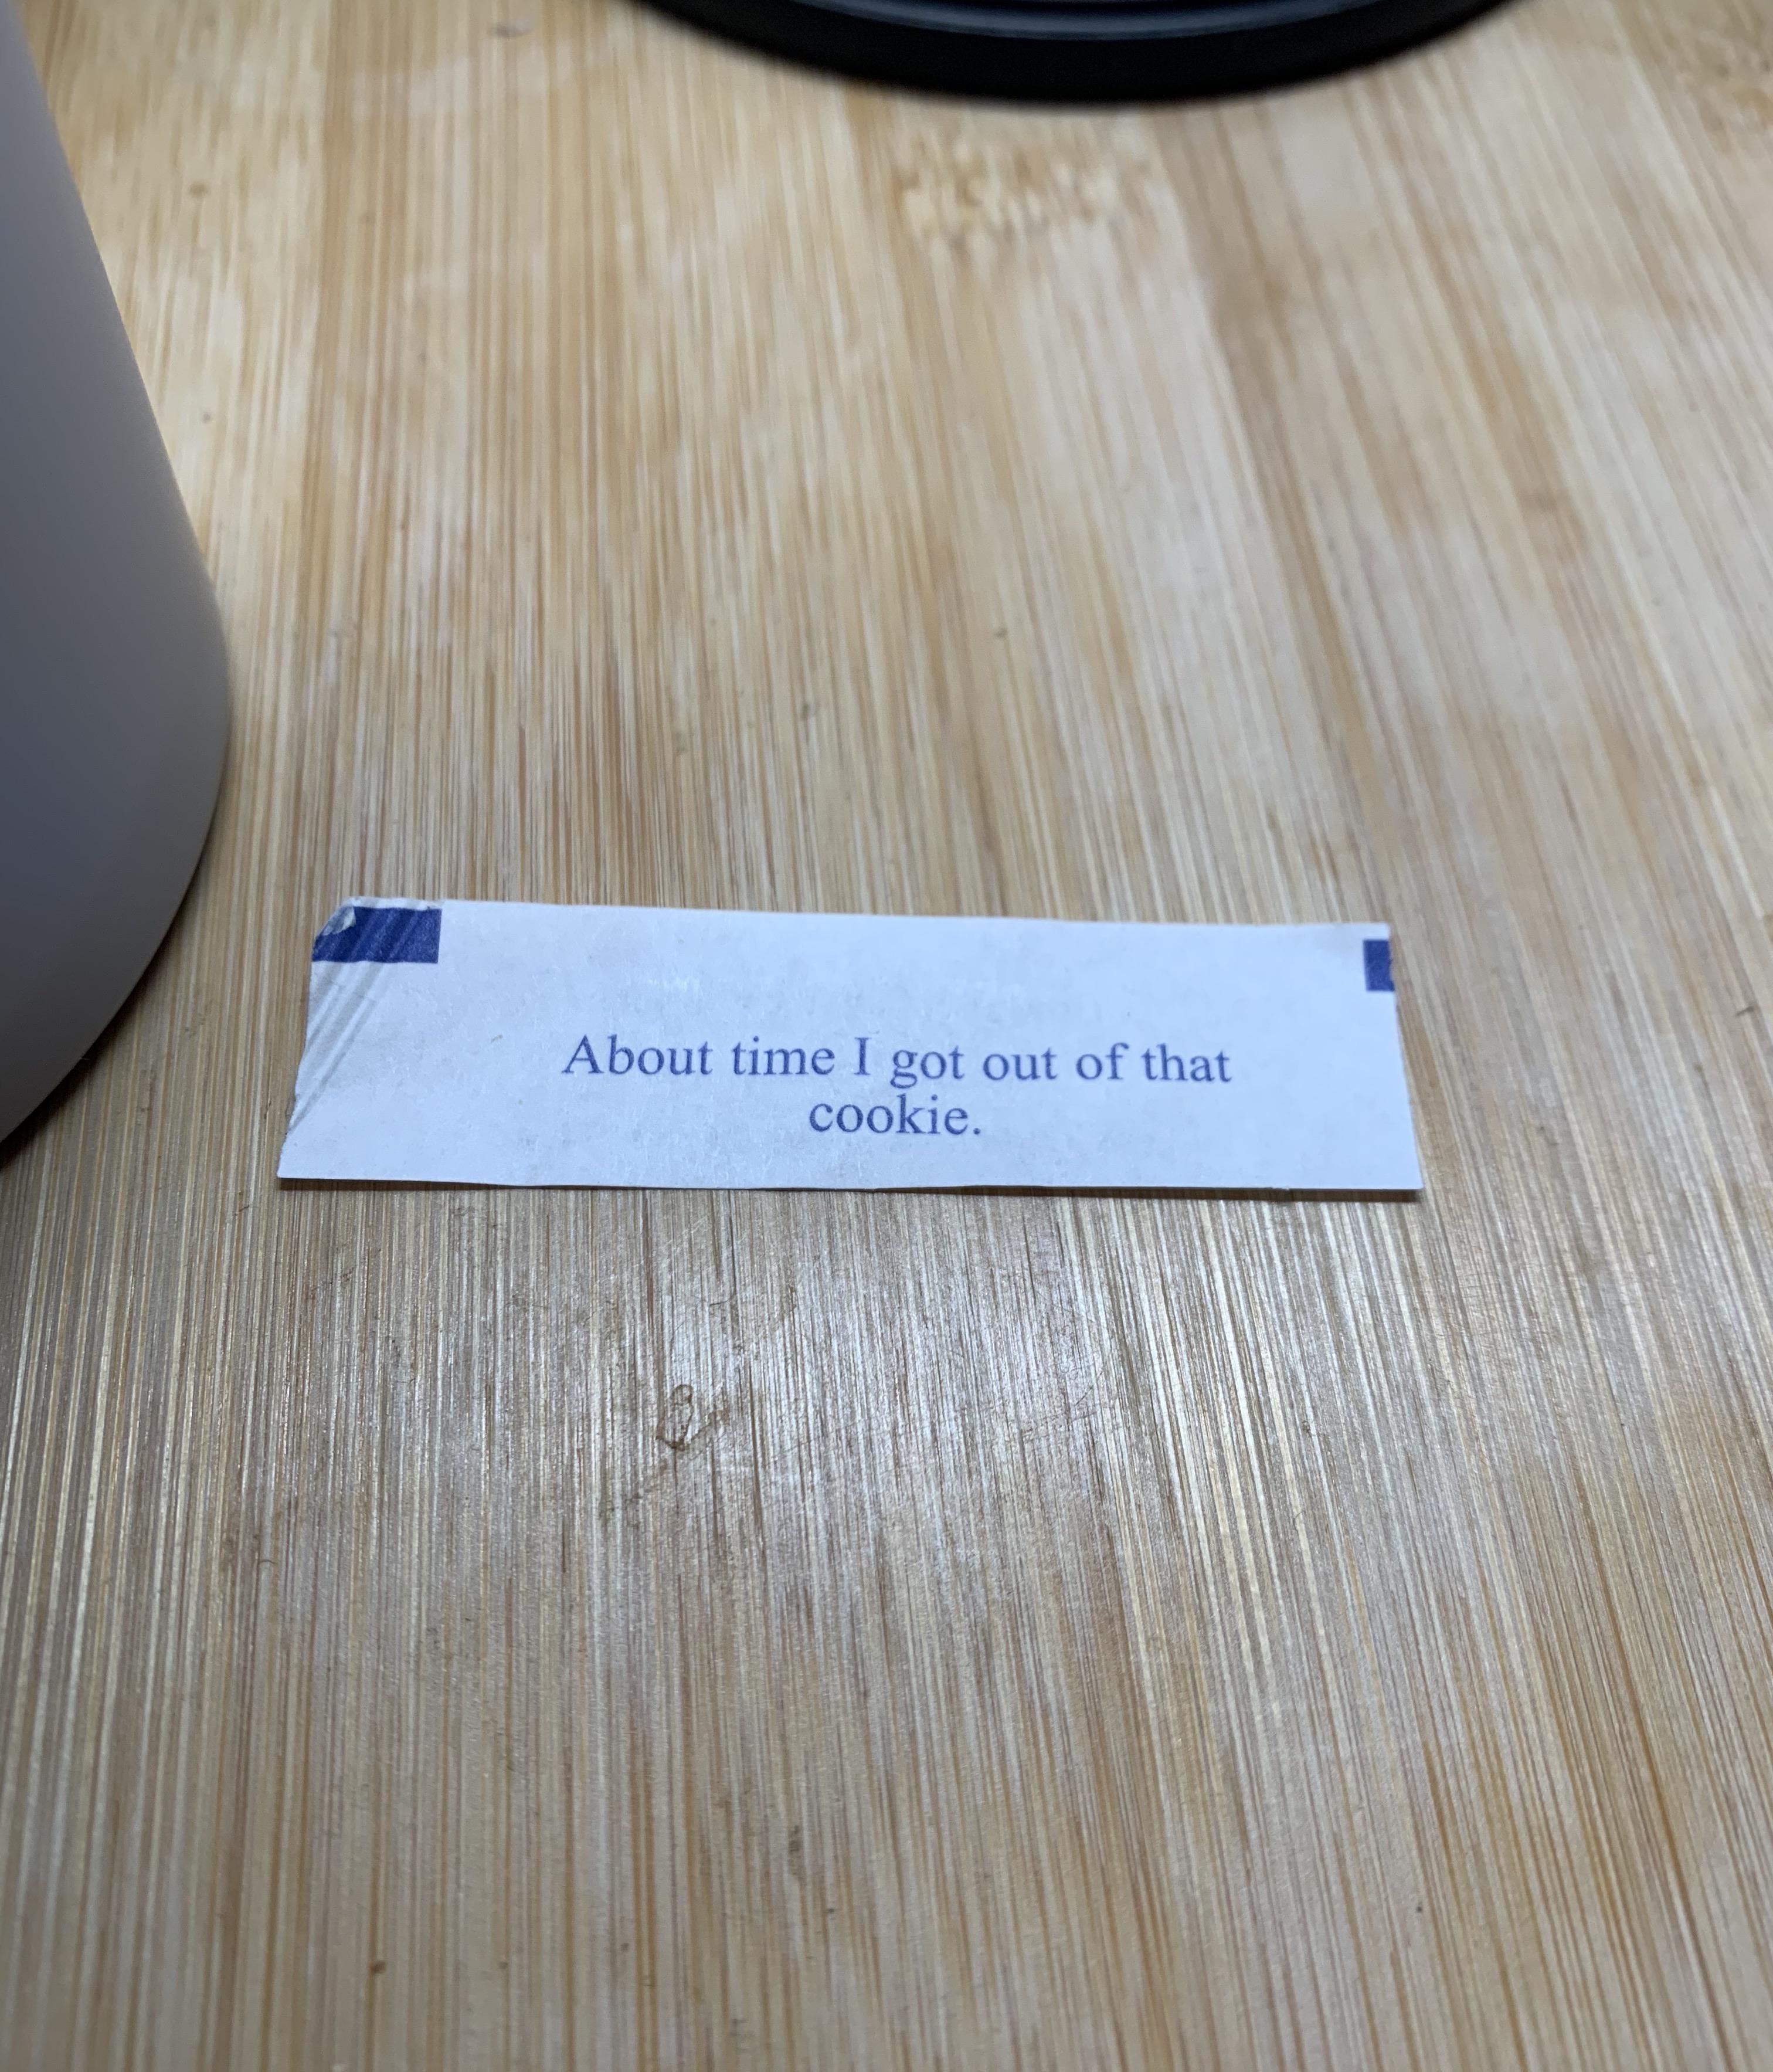 Got this in my fortune cookie today